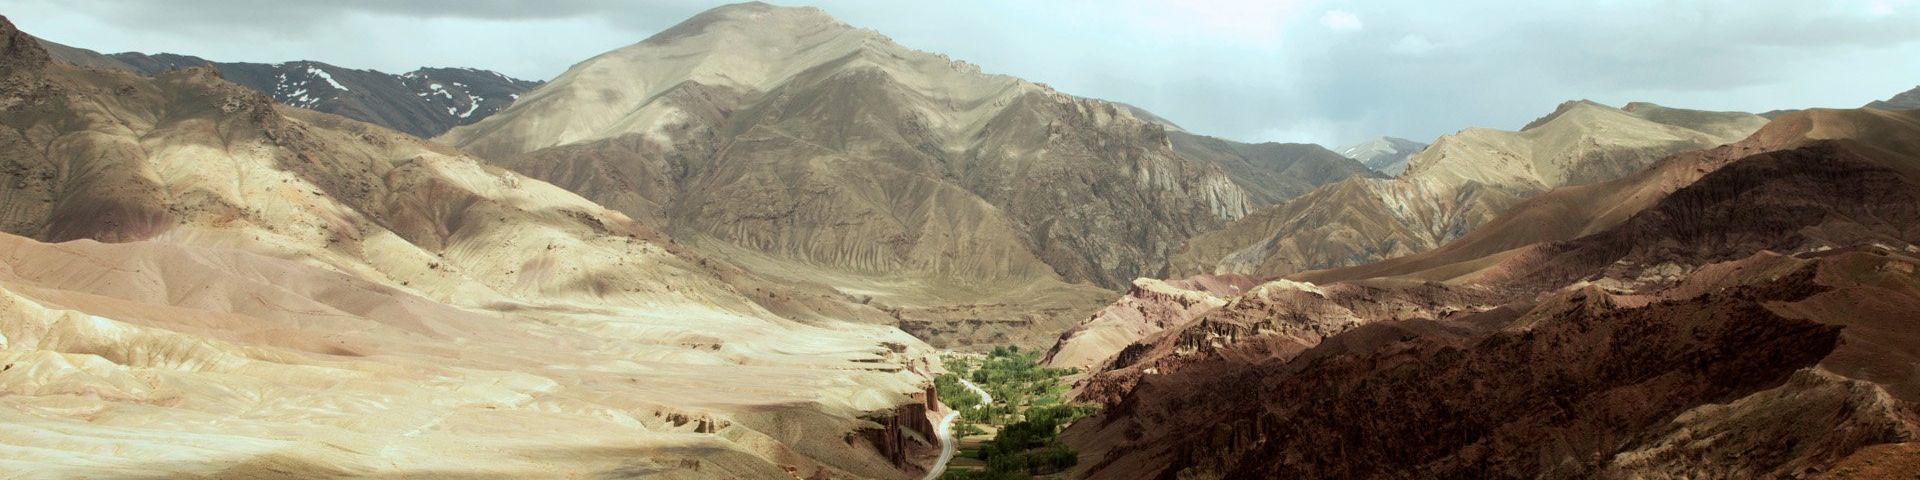 A mountain landscape, with a verdant Kabul to Bamyan road running through it.